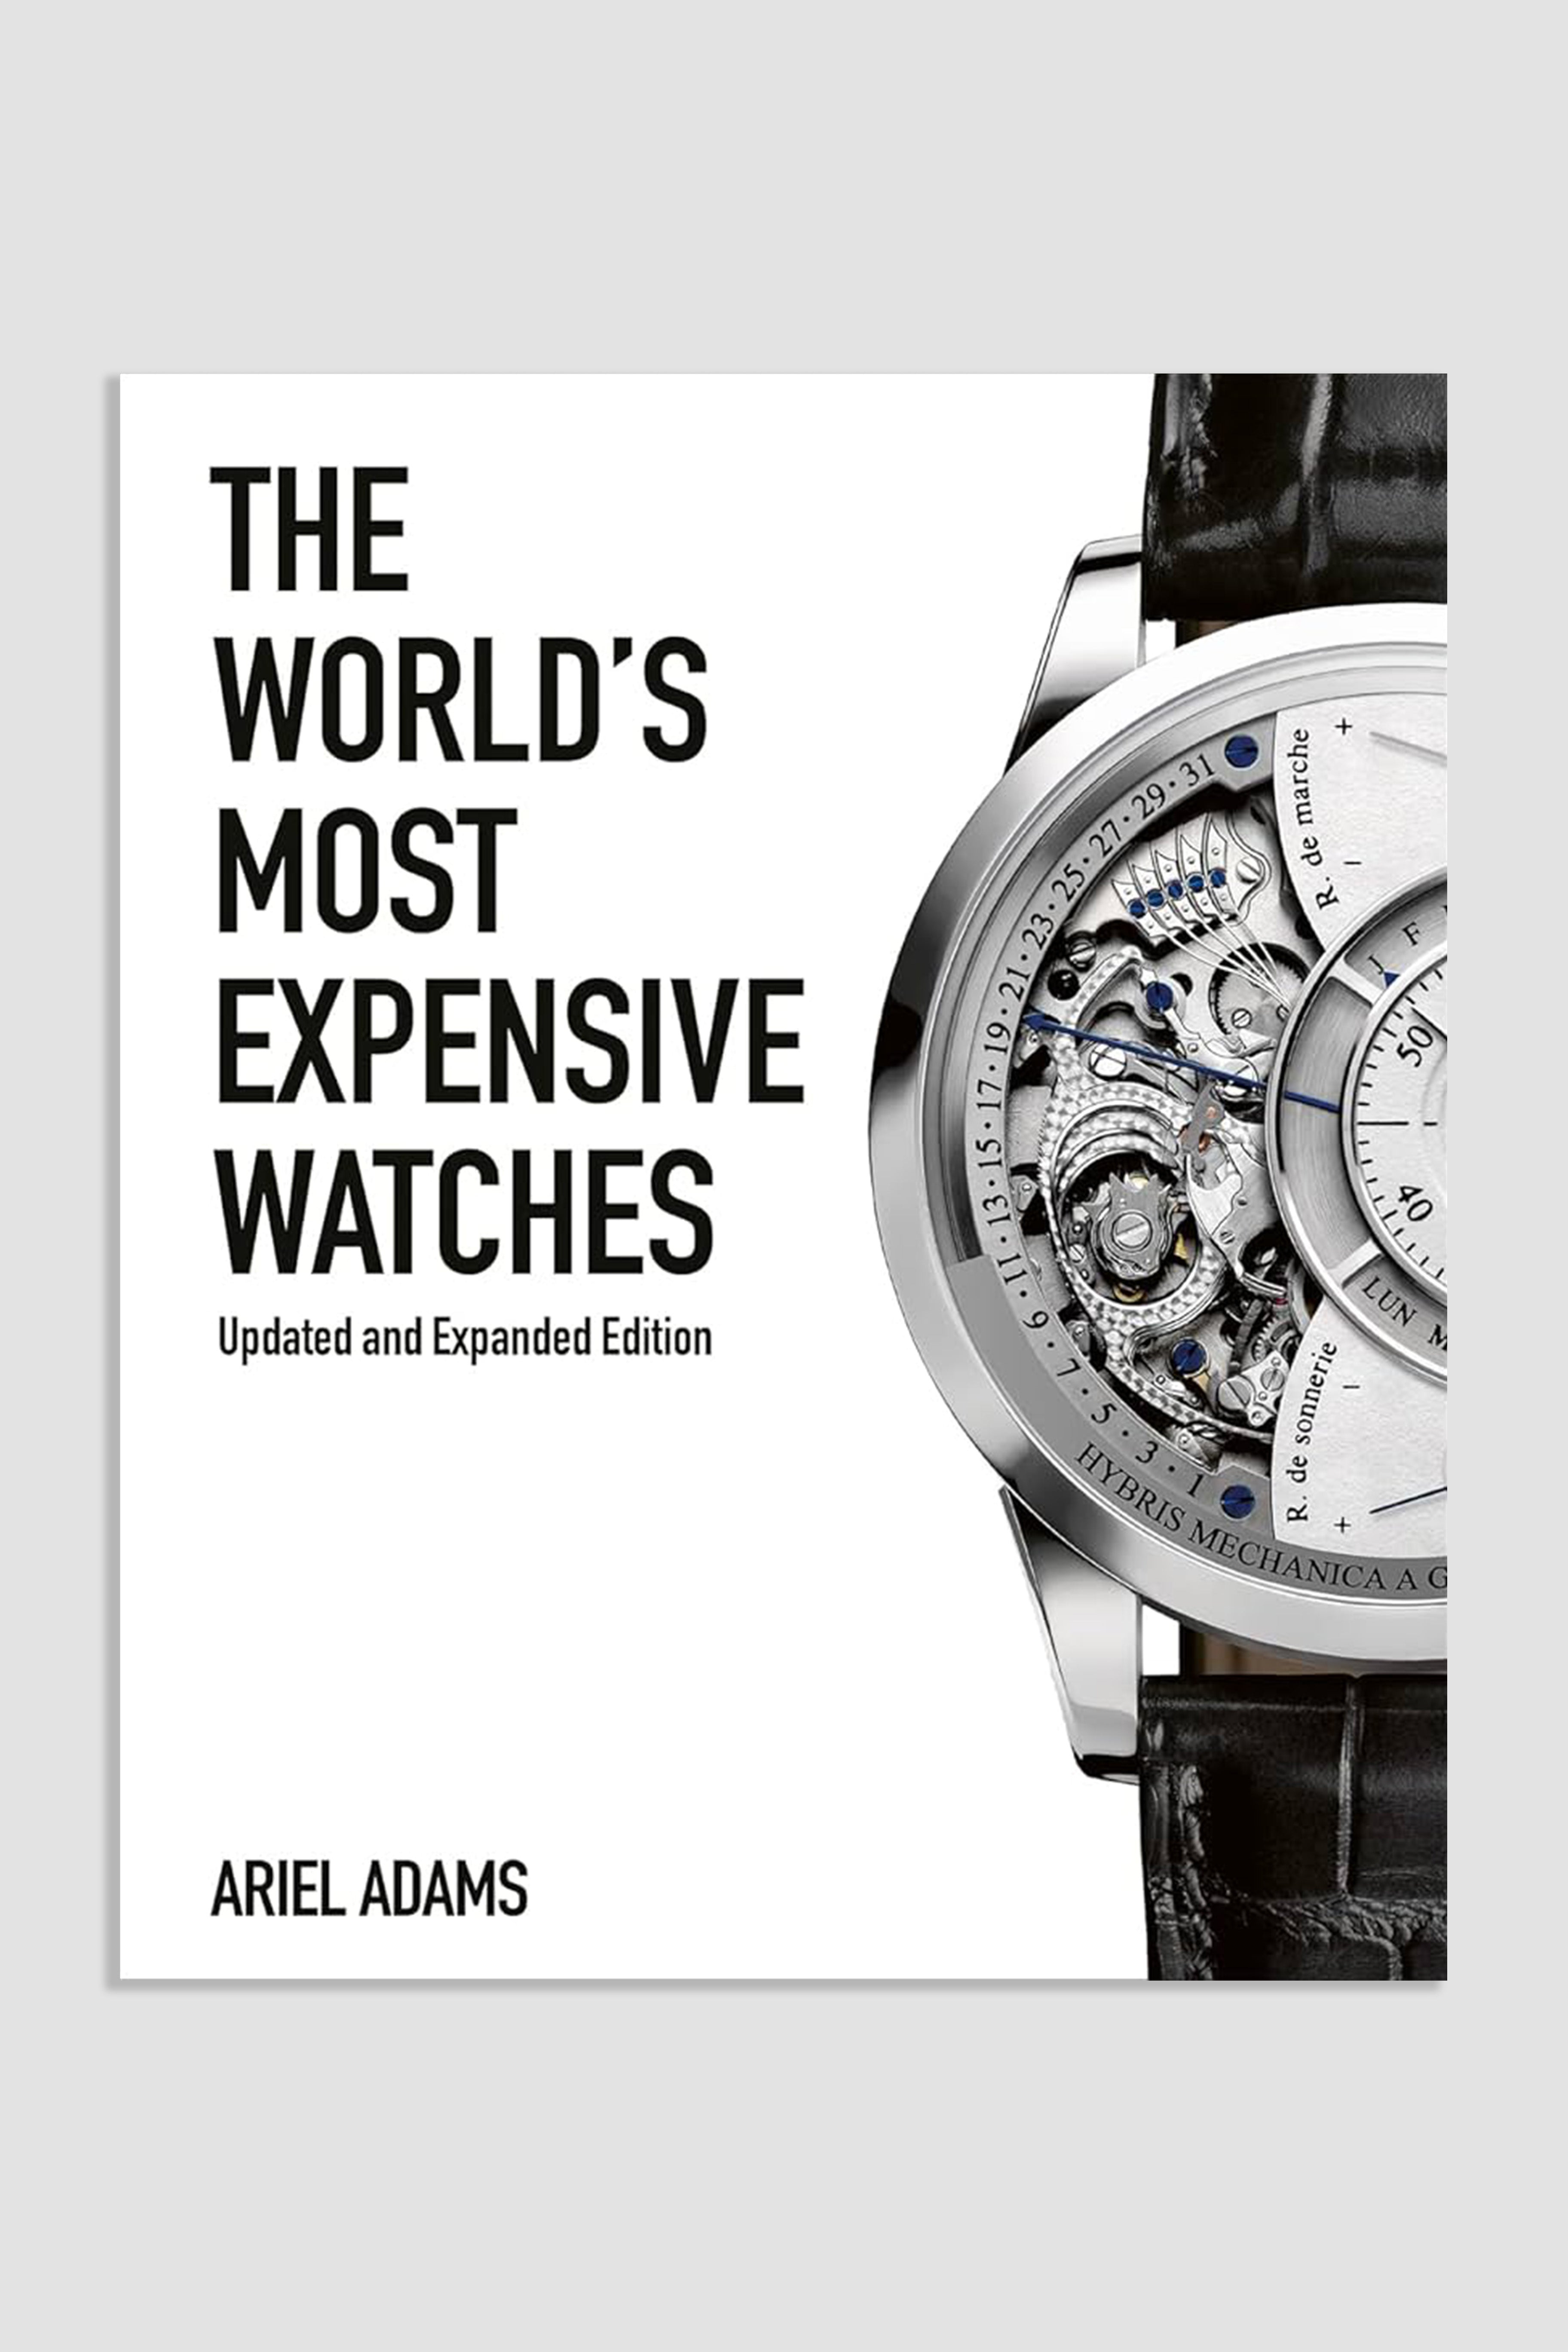 Most Expensive Watches by Ariel Adams